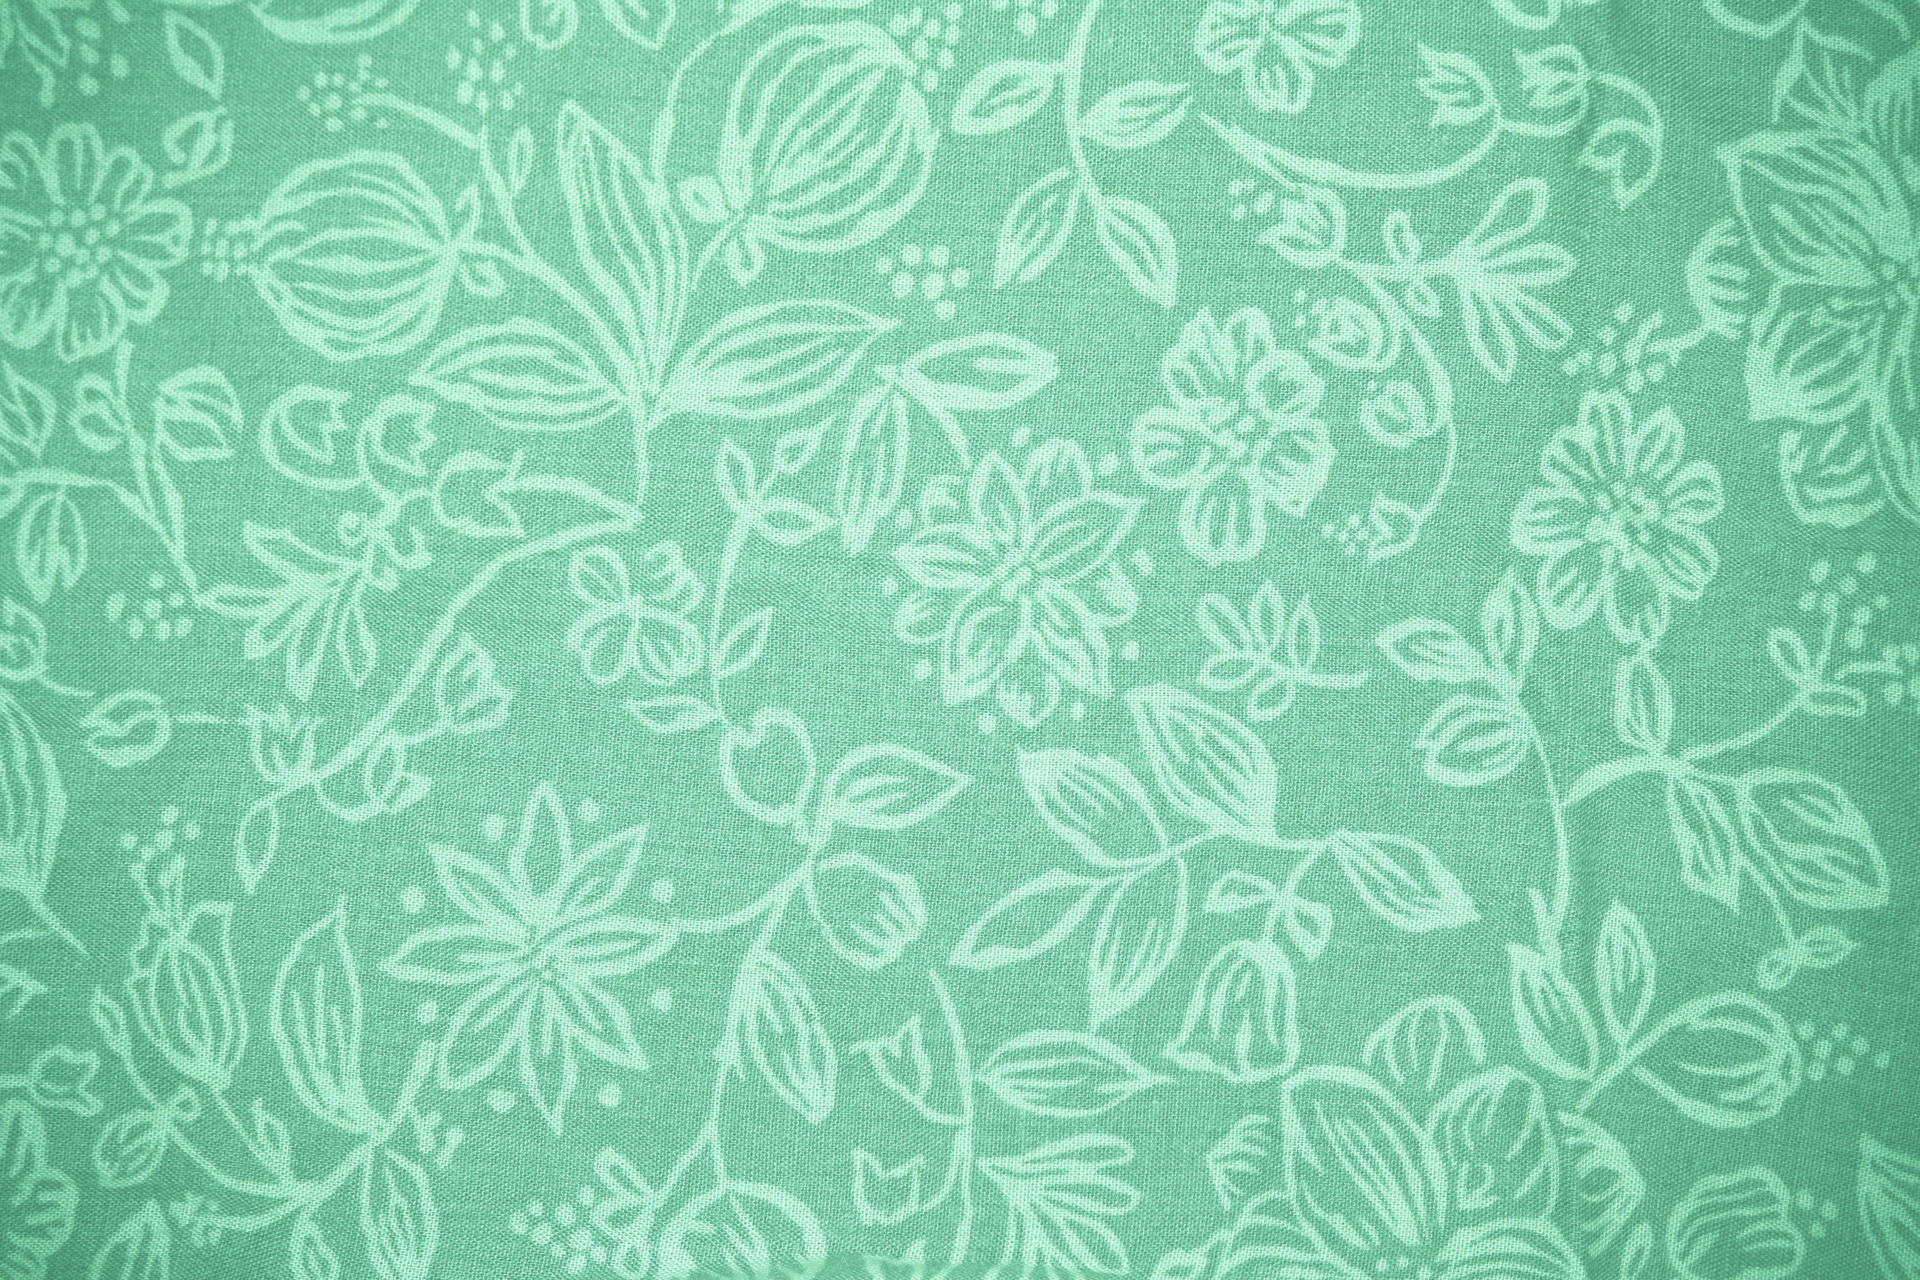 Patterned Sage Green Aesthetic Background